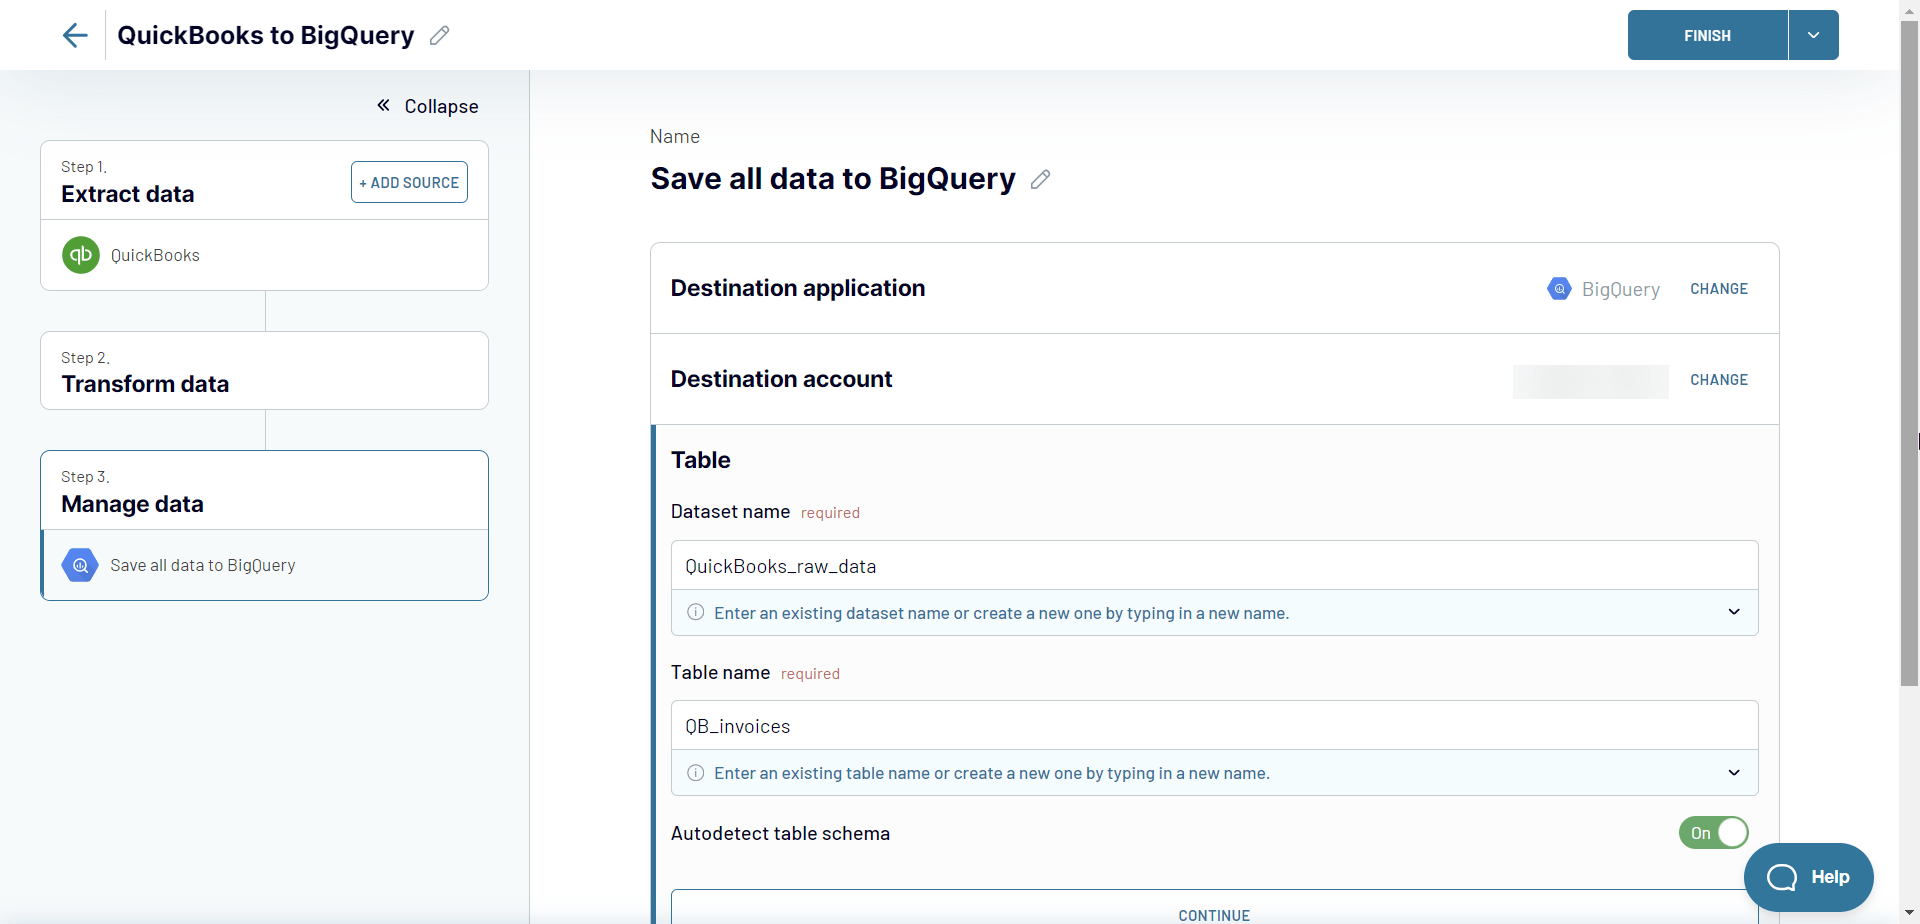 Manage QuickBooks data to load to BigQuery